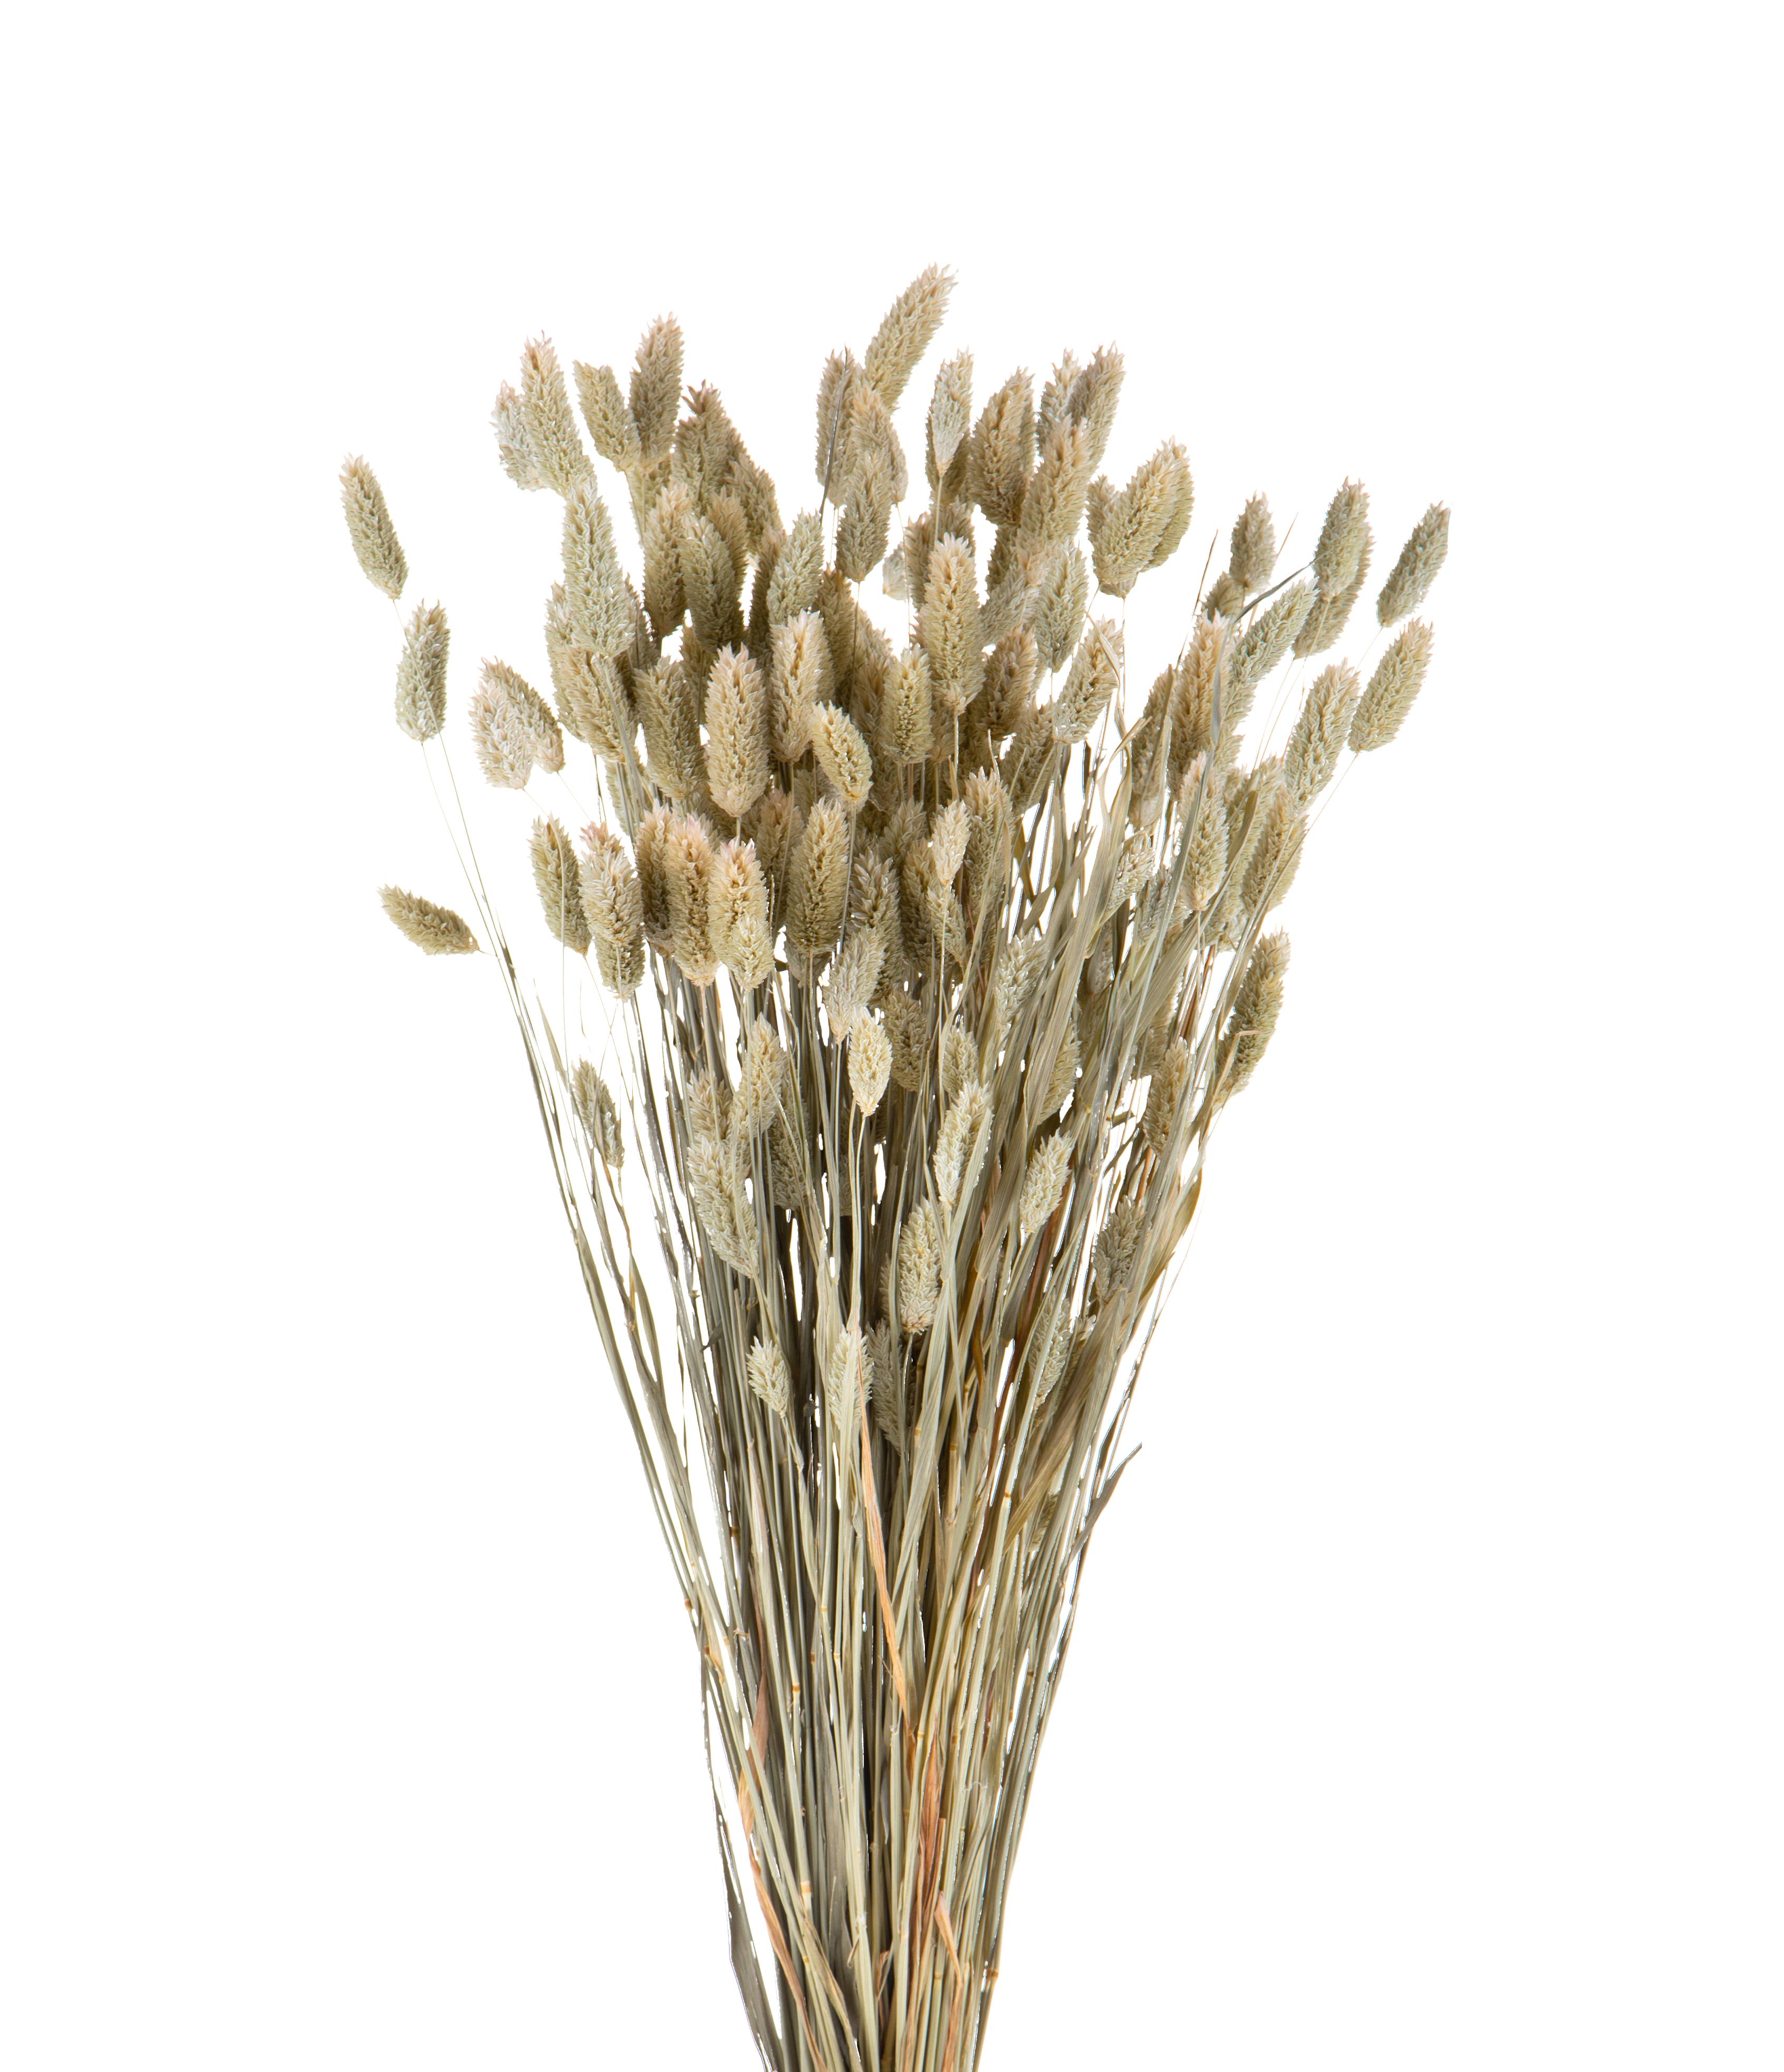 NATURAL PRODUCTS DRIED FLOWERS AND ERBS,PHALARIS NATURALE MAZZO